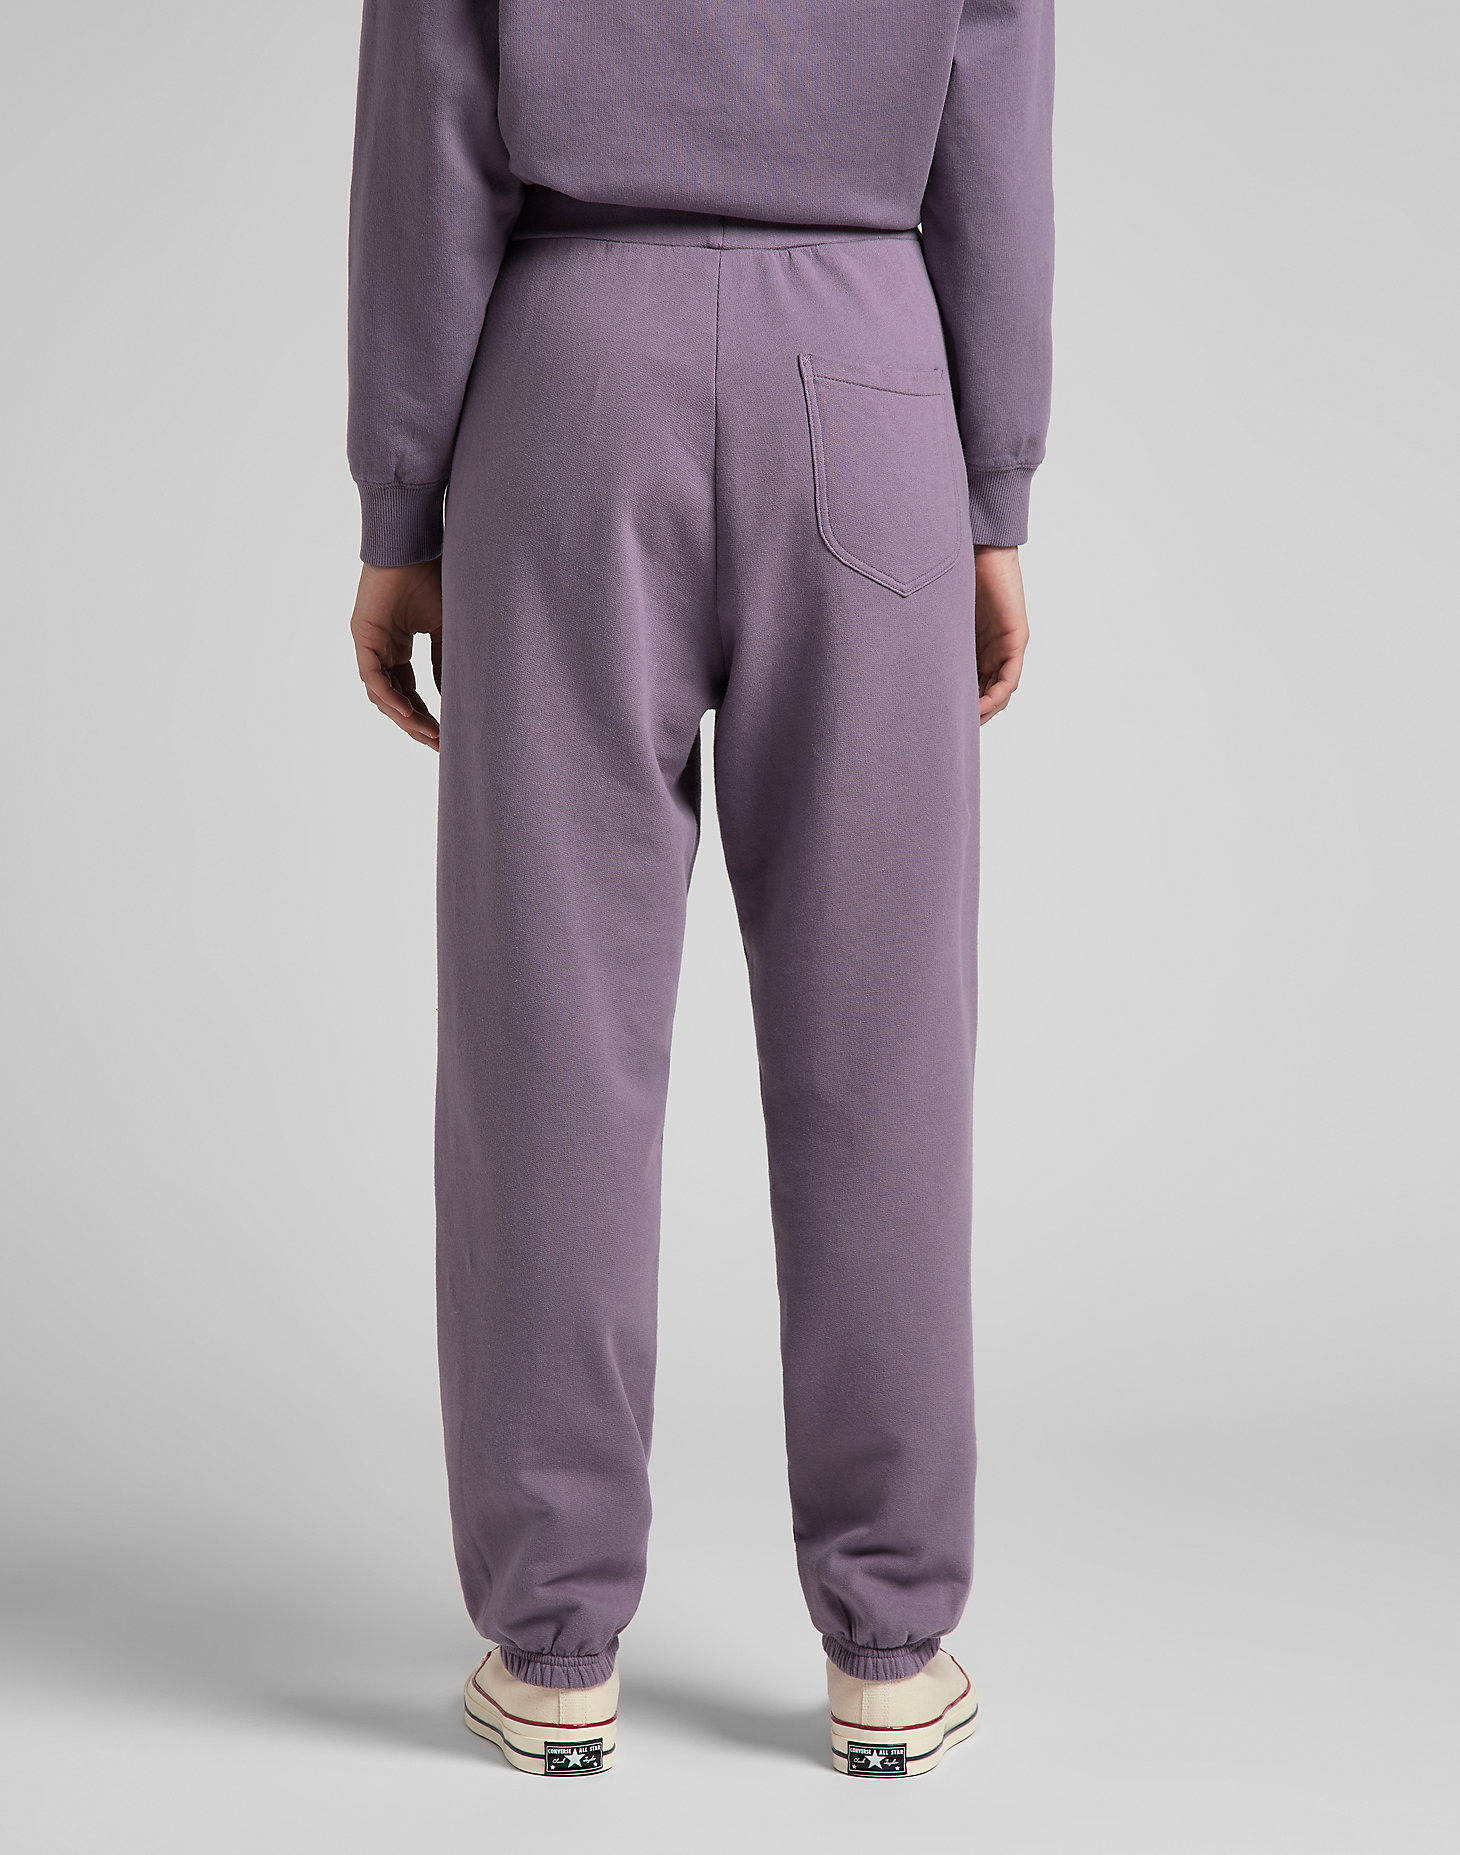 Relaxed Sweatpants in Washed Purple alternative view 4